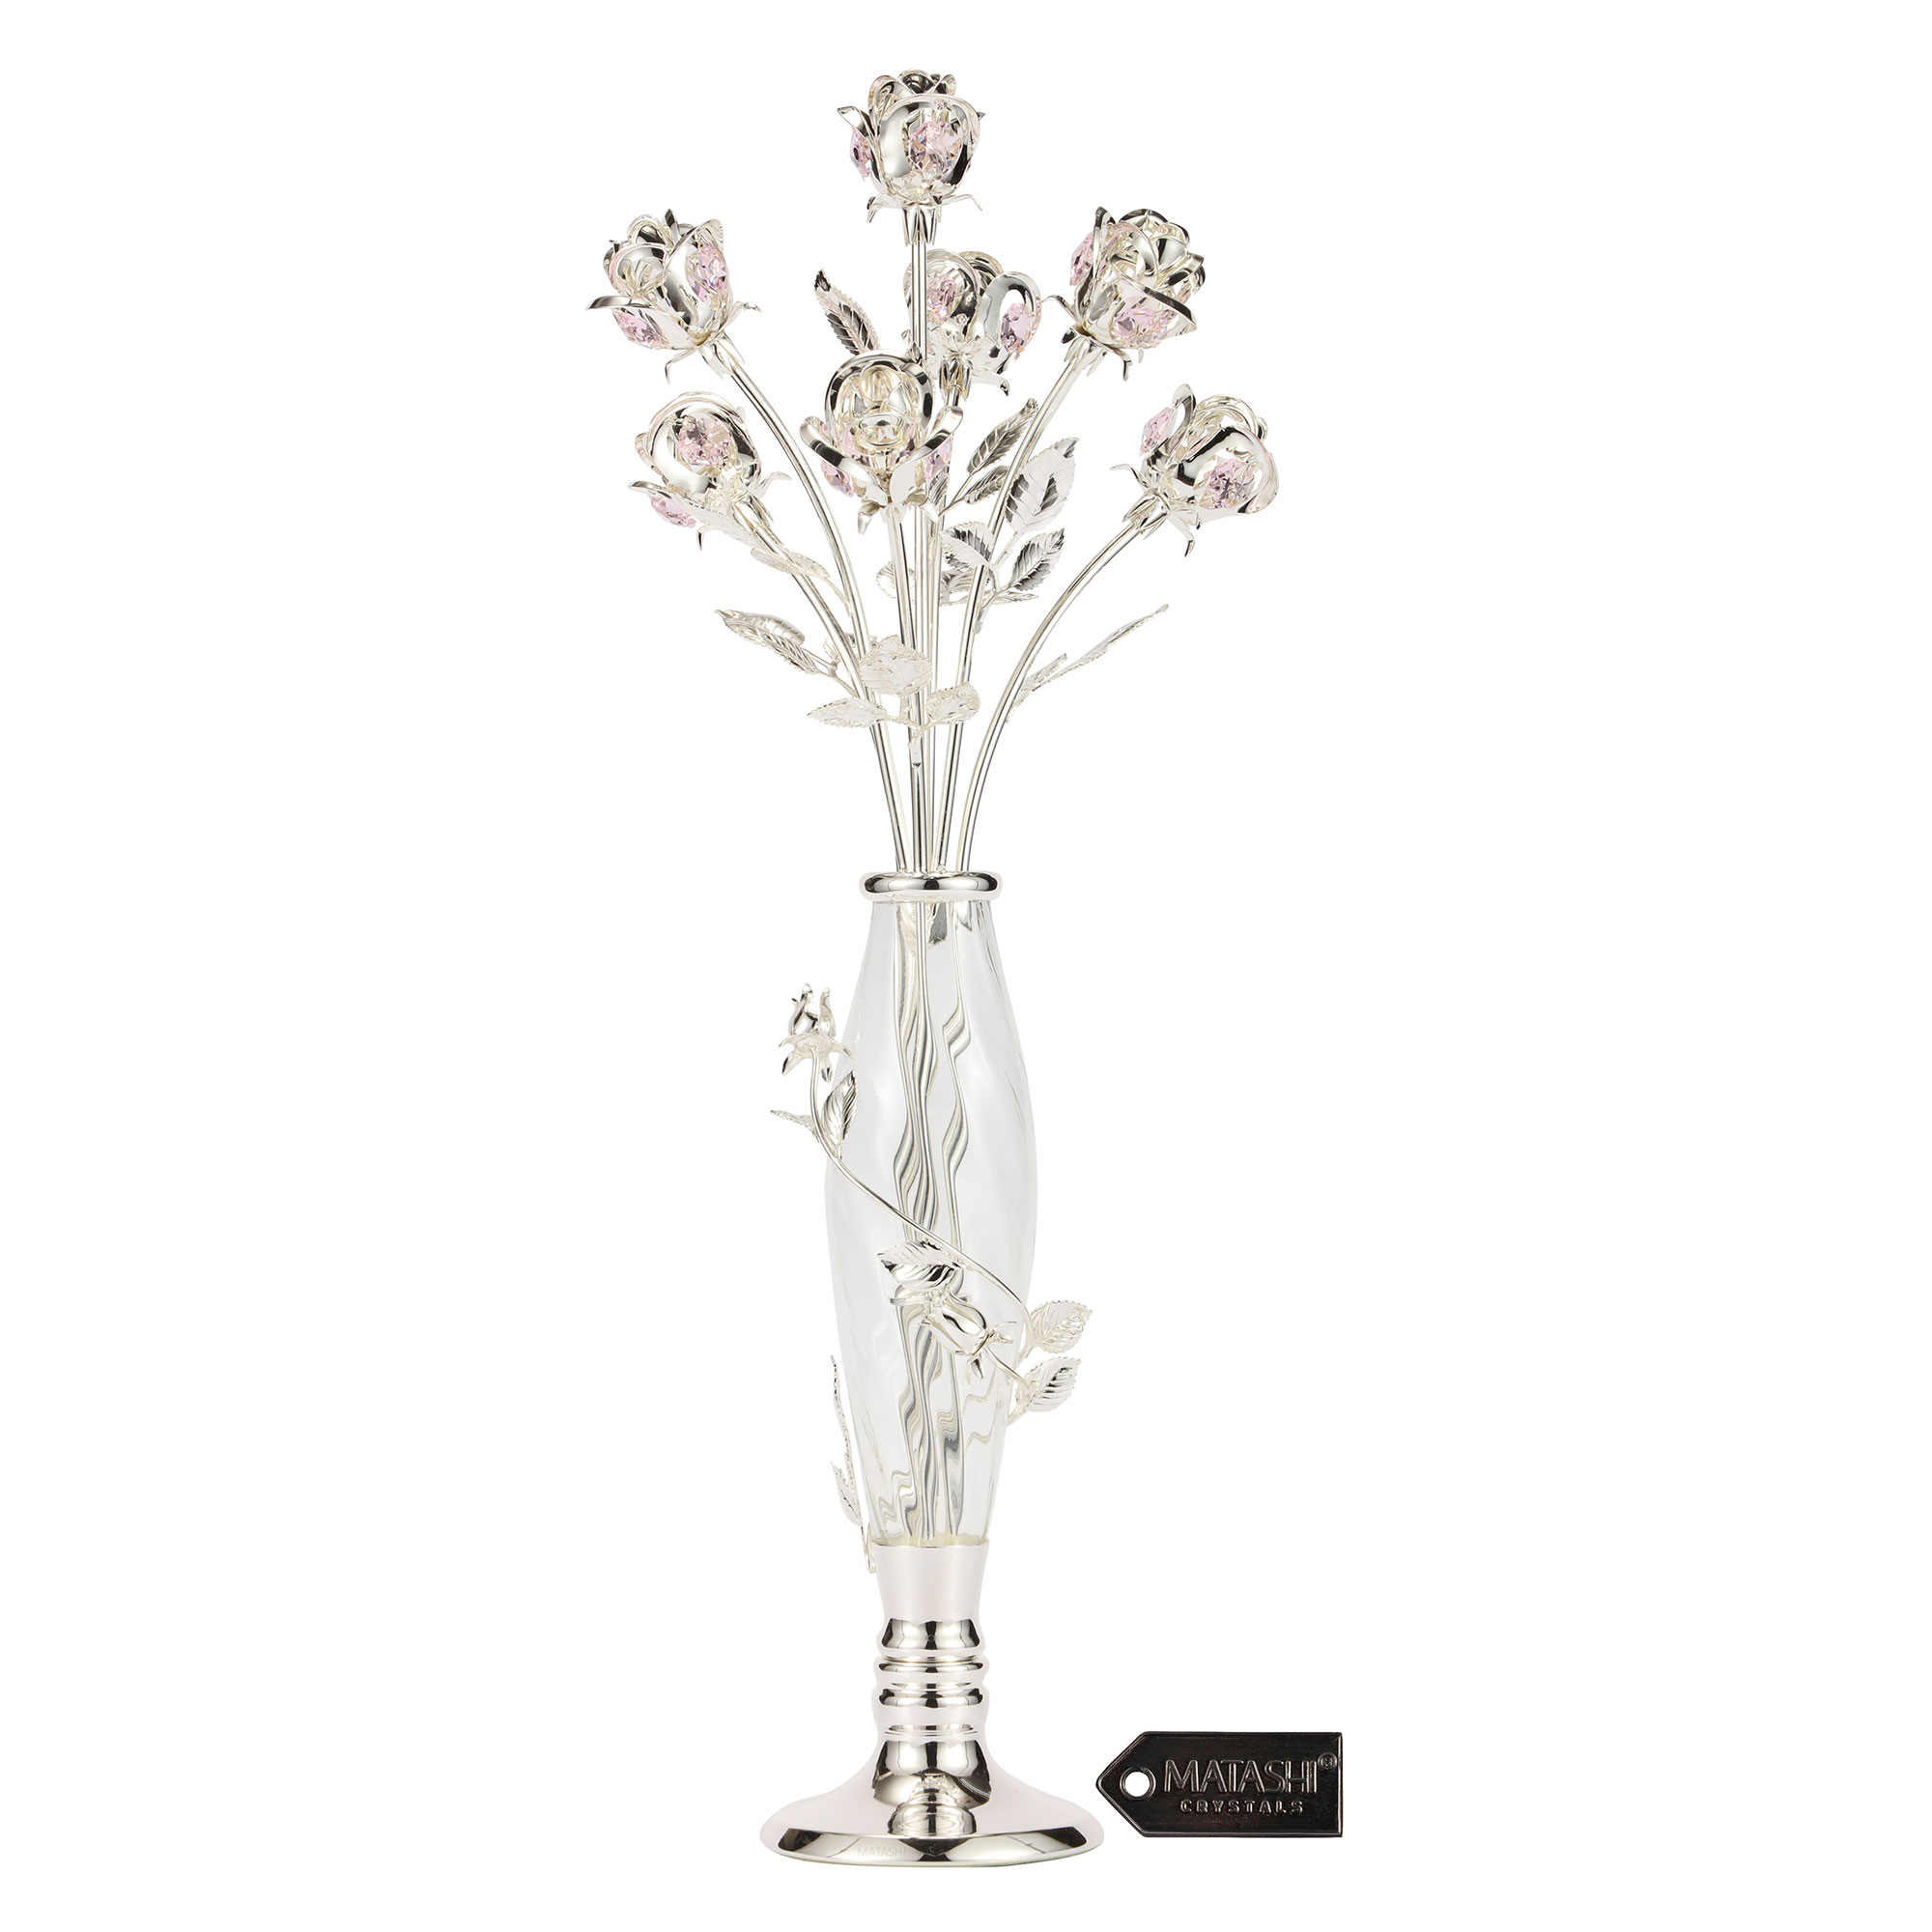 Silver Plated Crystal Studded Rose Bouquet In An Elegant Vase, Beautiful Flower Ornament Crafted With Stunning Crystals, By Matashi